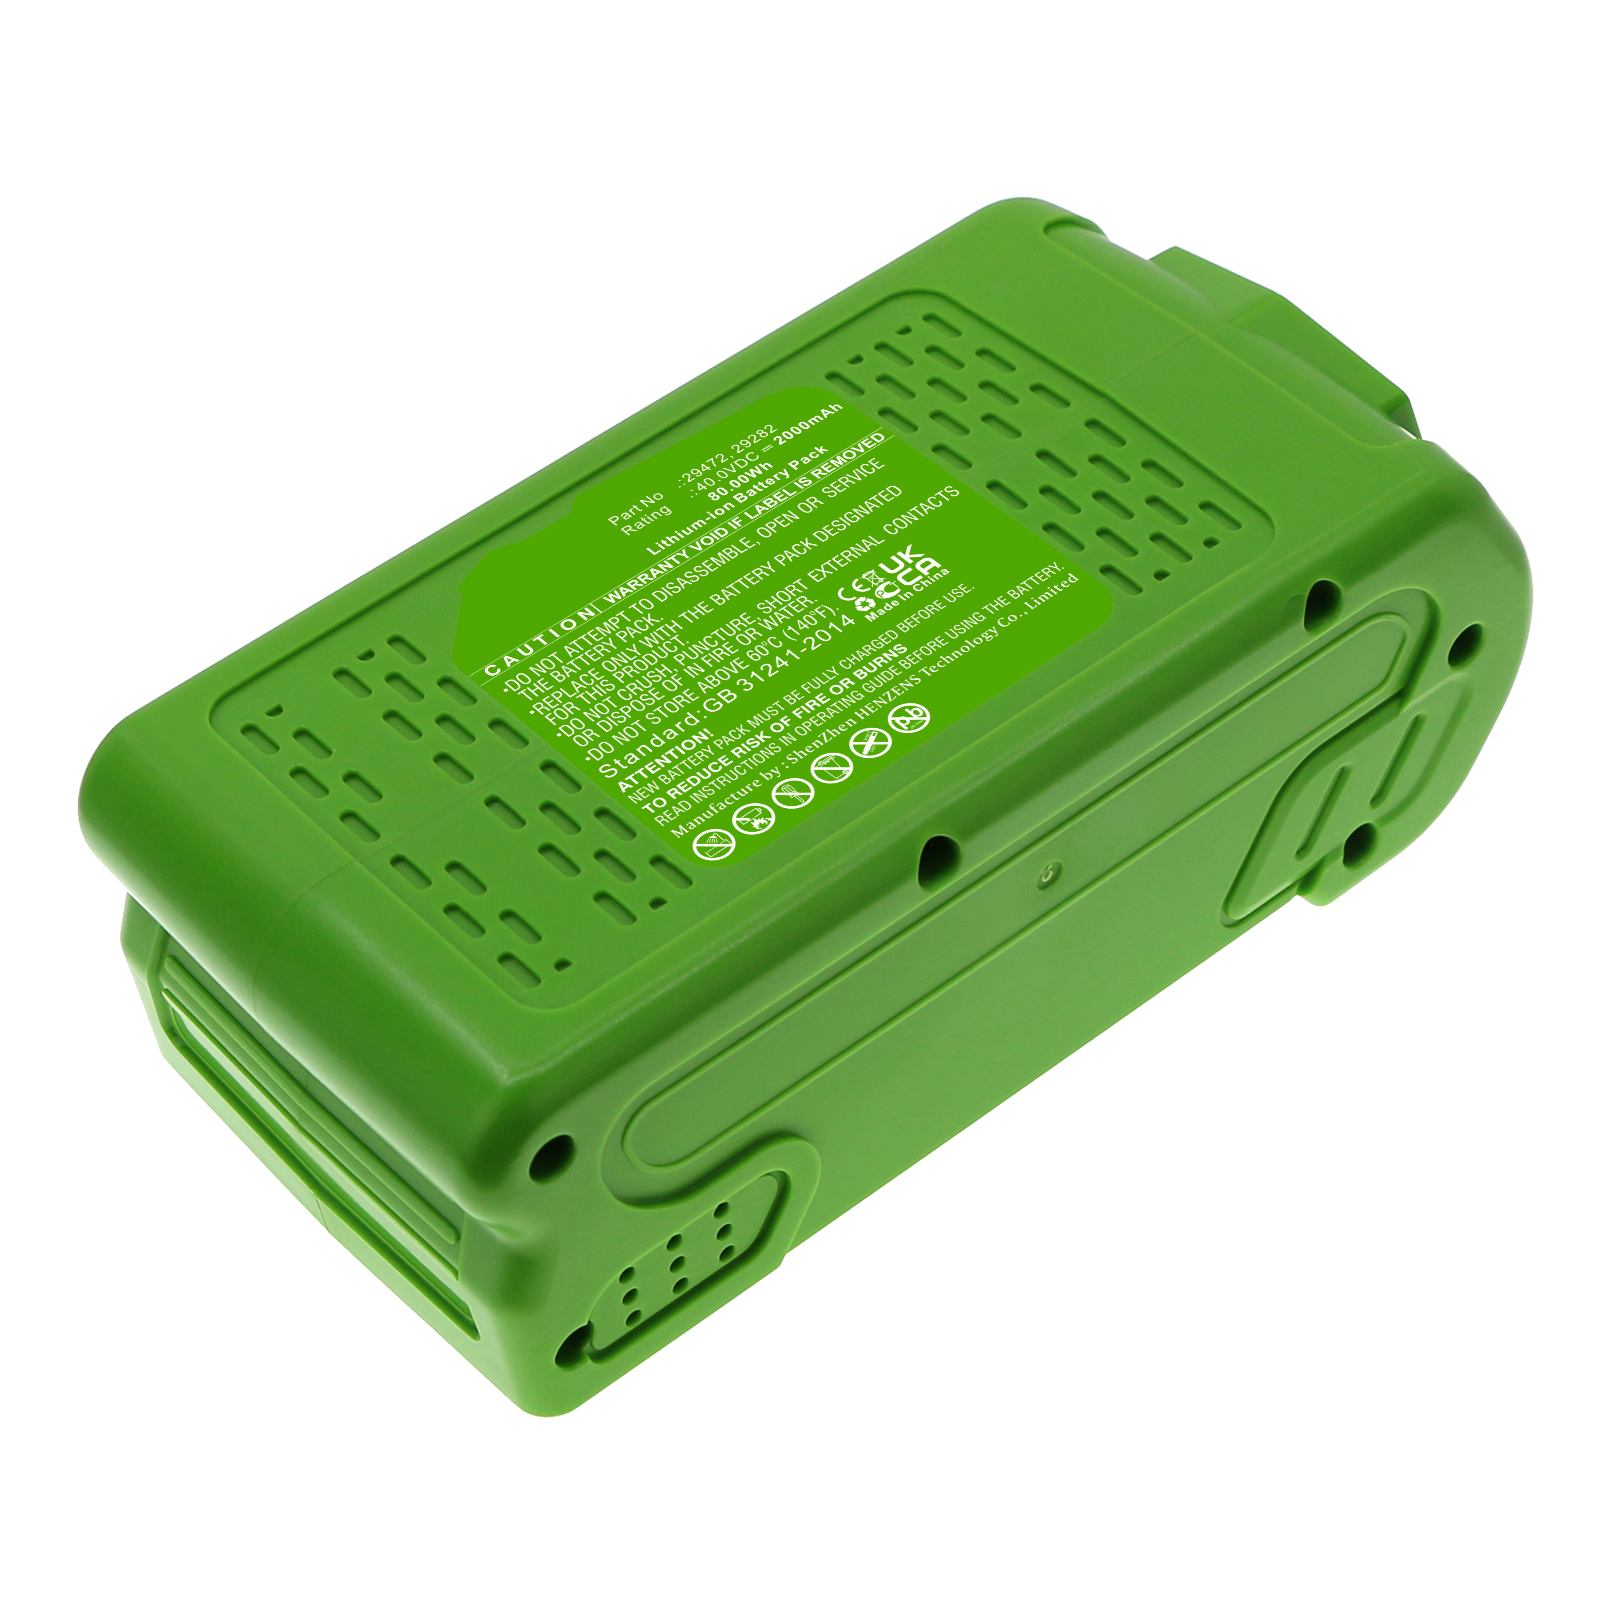 Synergy Digital Power Tool Battery, Compatible with GreenWorks 24252 Power Tool Battery (Li-ion, 40V, 2000mAh)